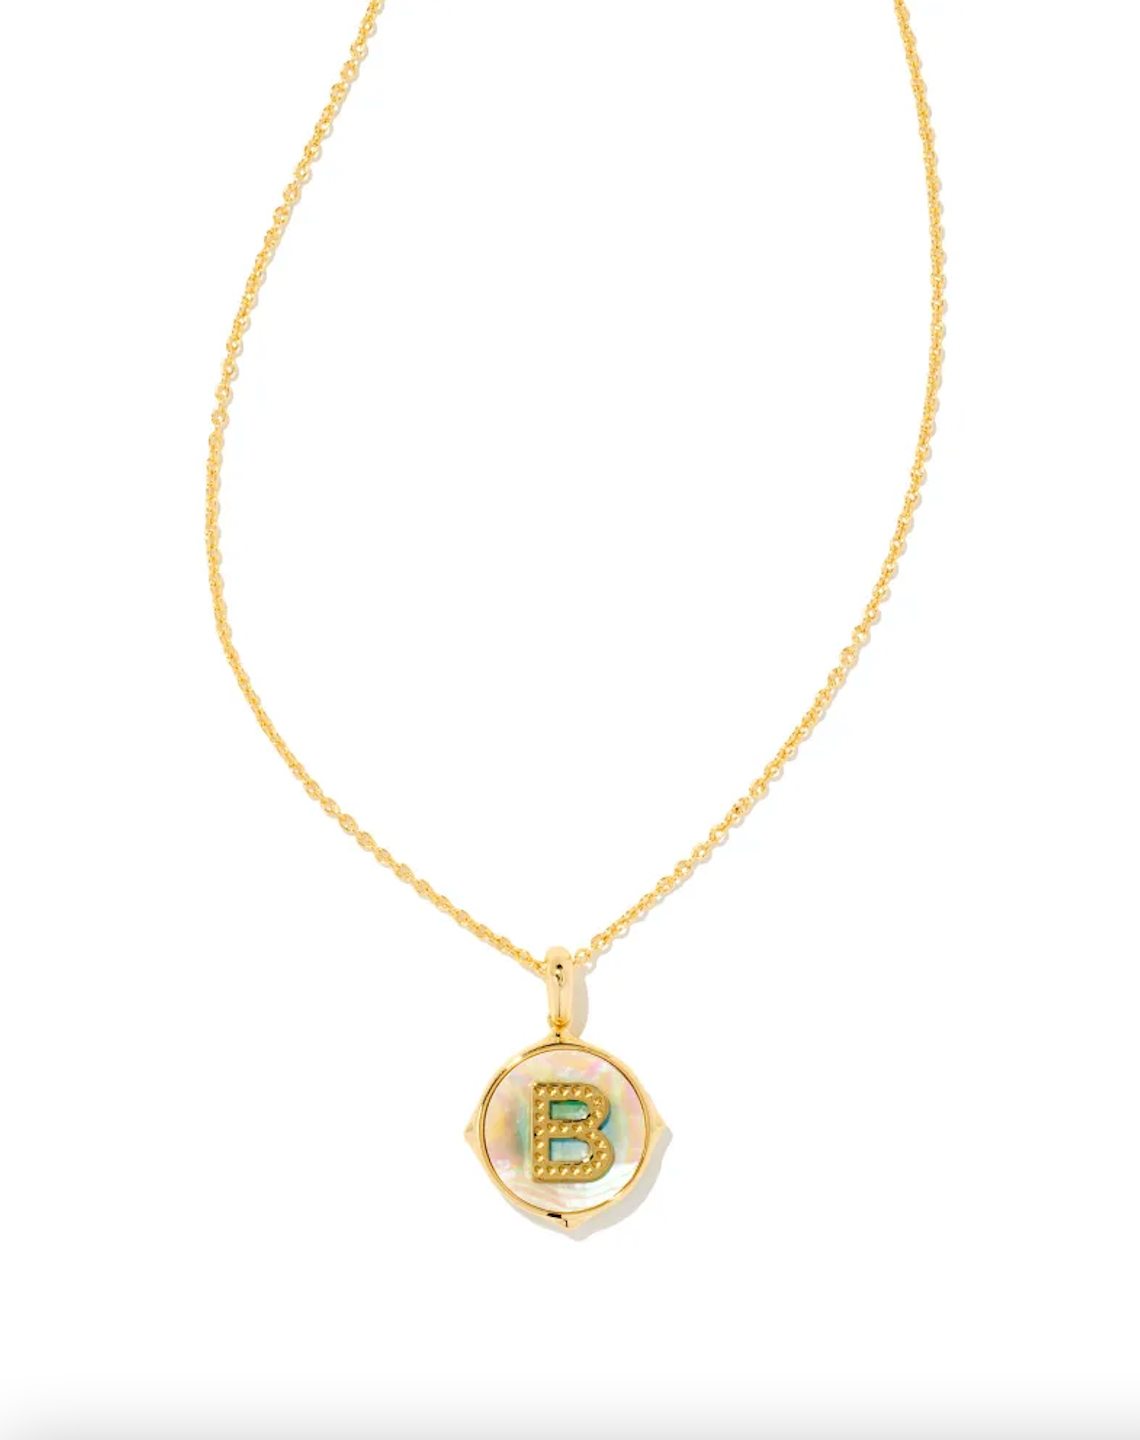 KENDRA SCOTT LETTER B DISC PENDENT NECKLACE GOLD IRIDESCENT ABALONE